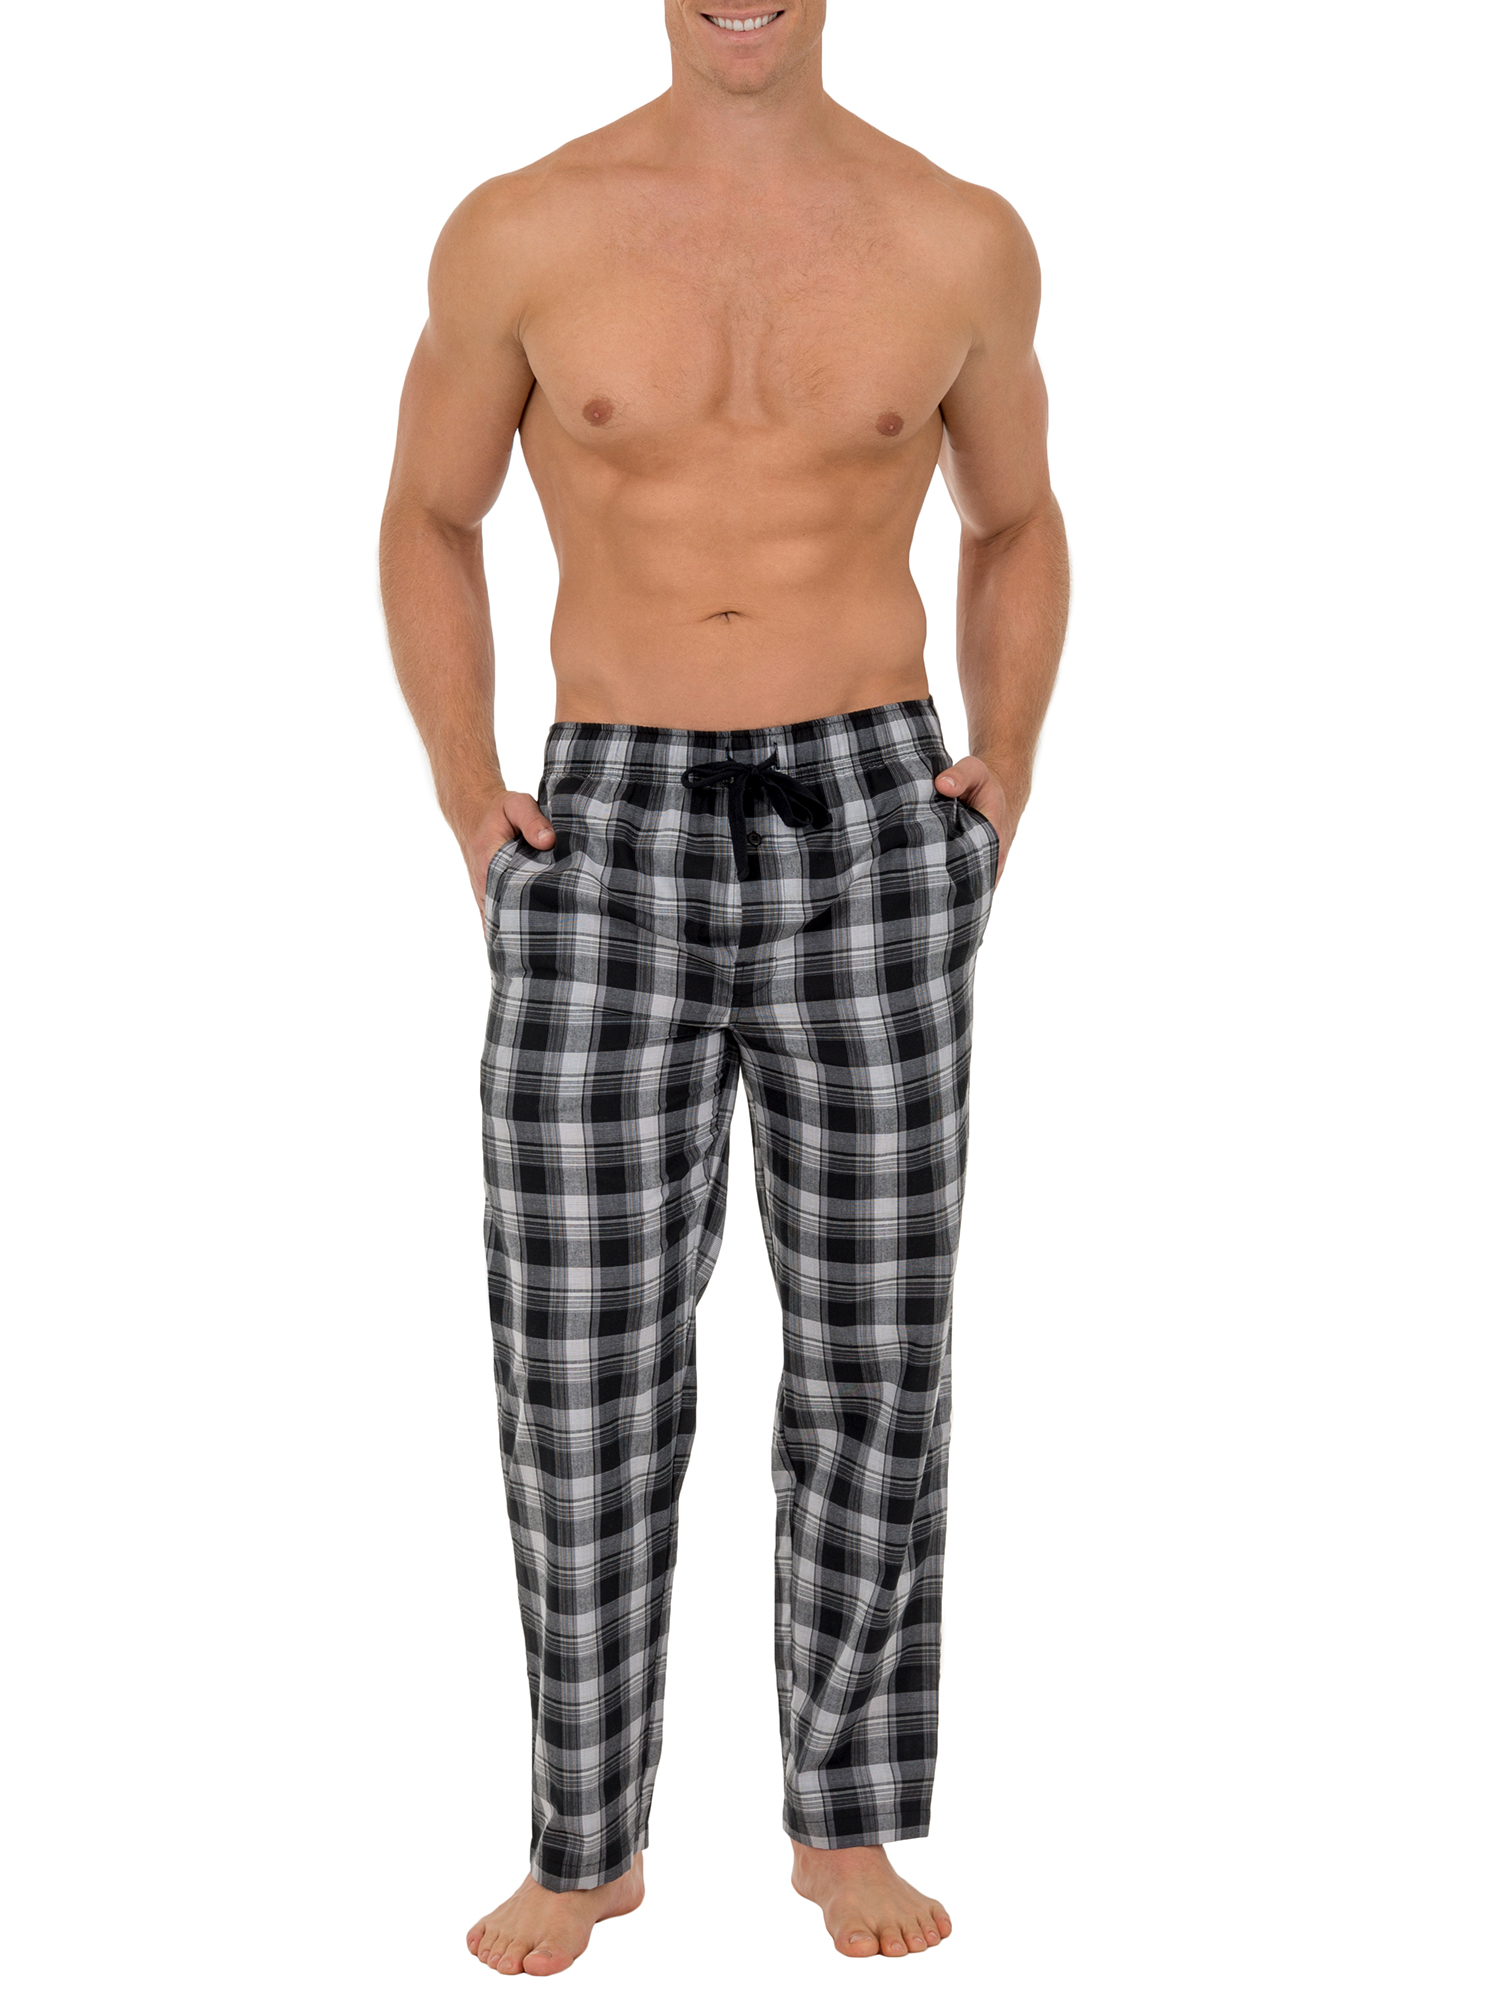 Fruit of the Loom Men's and Big Men's Microsanded Woven Plaid Pajama Pants, Sizes S-6XL & LT-3XLT - image 2 of 6